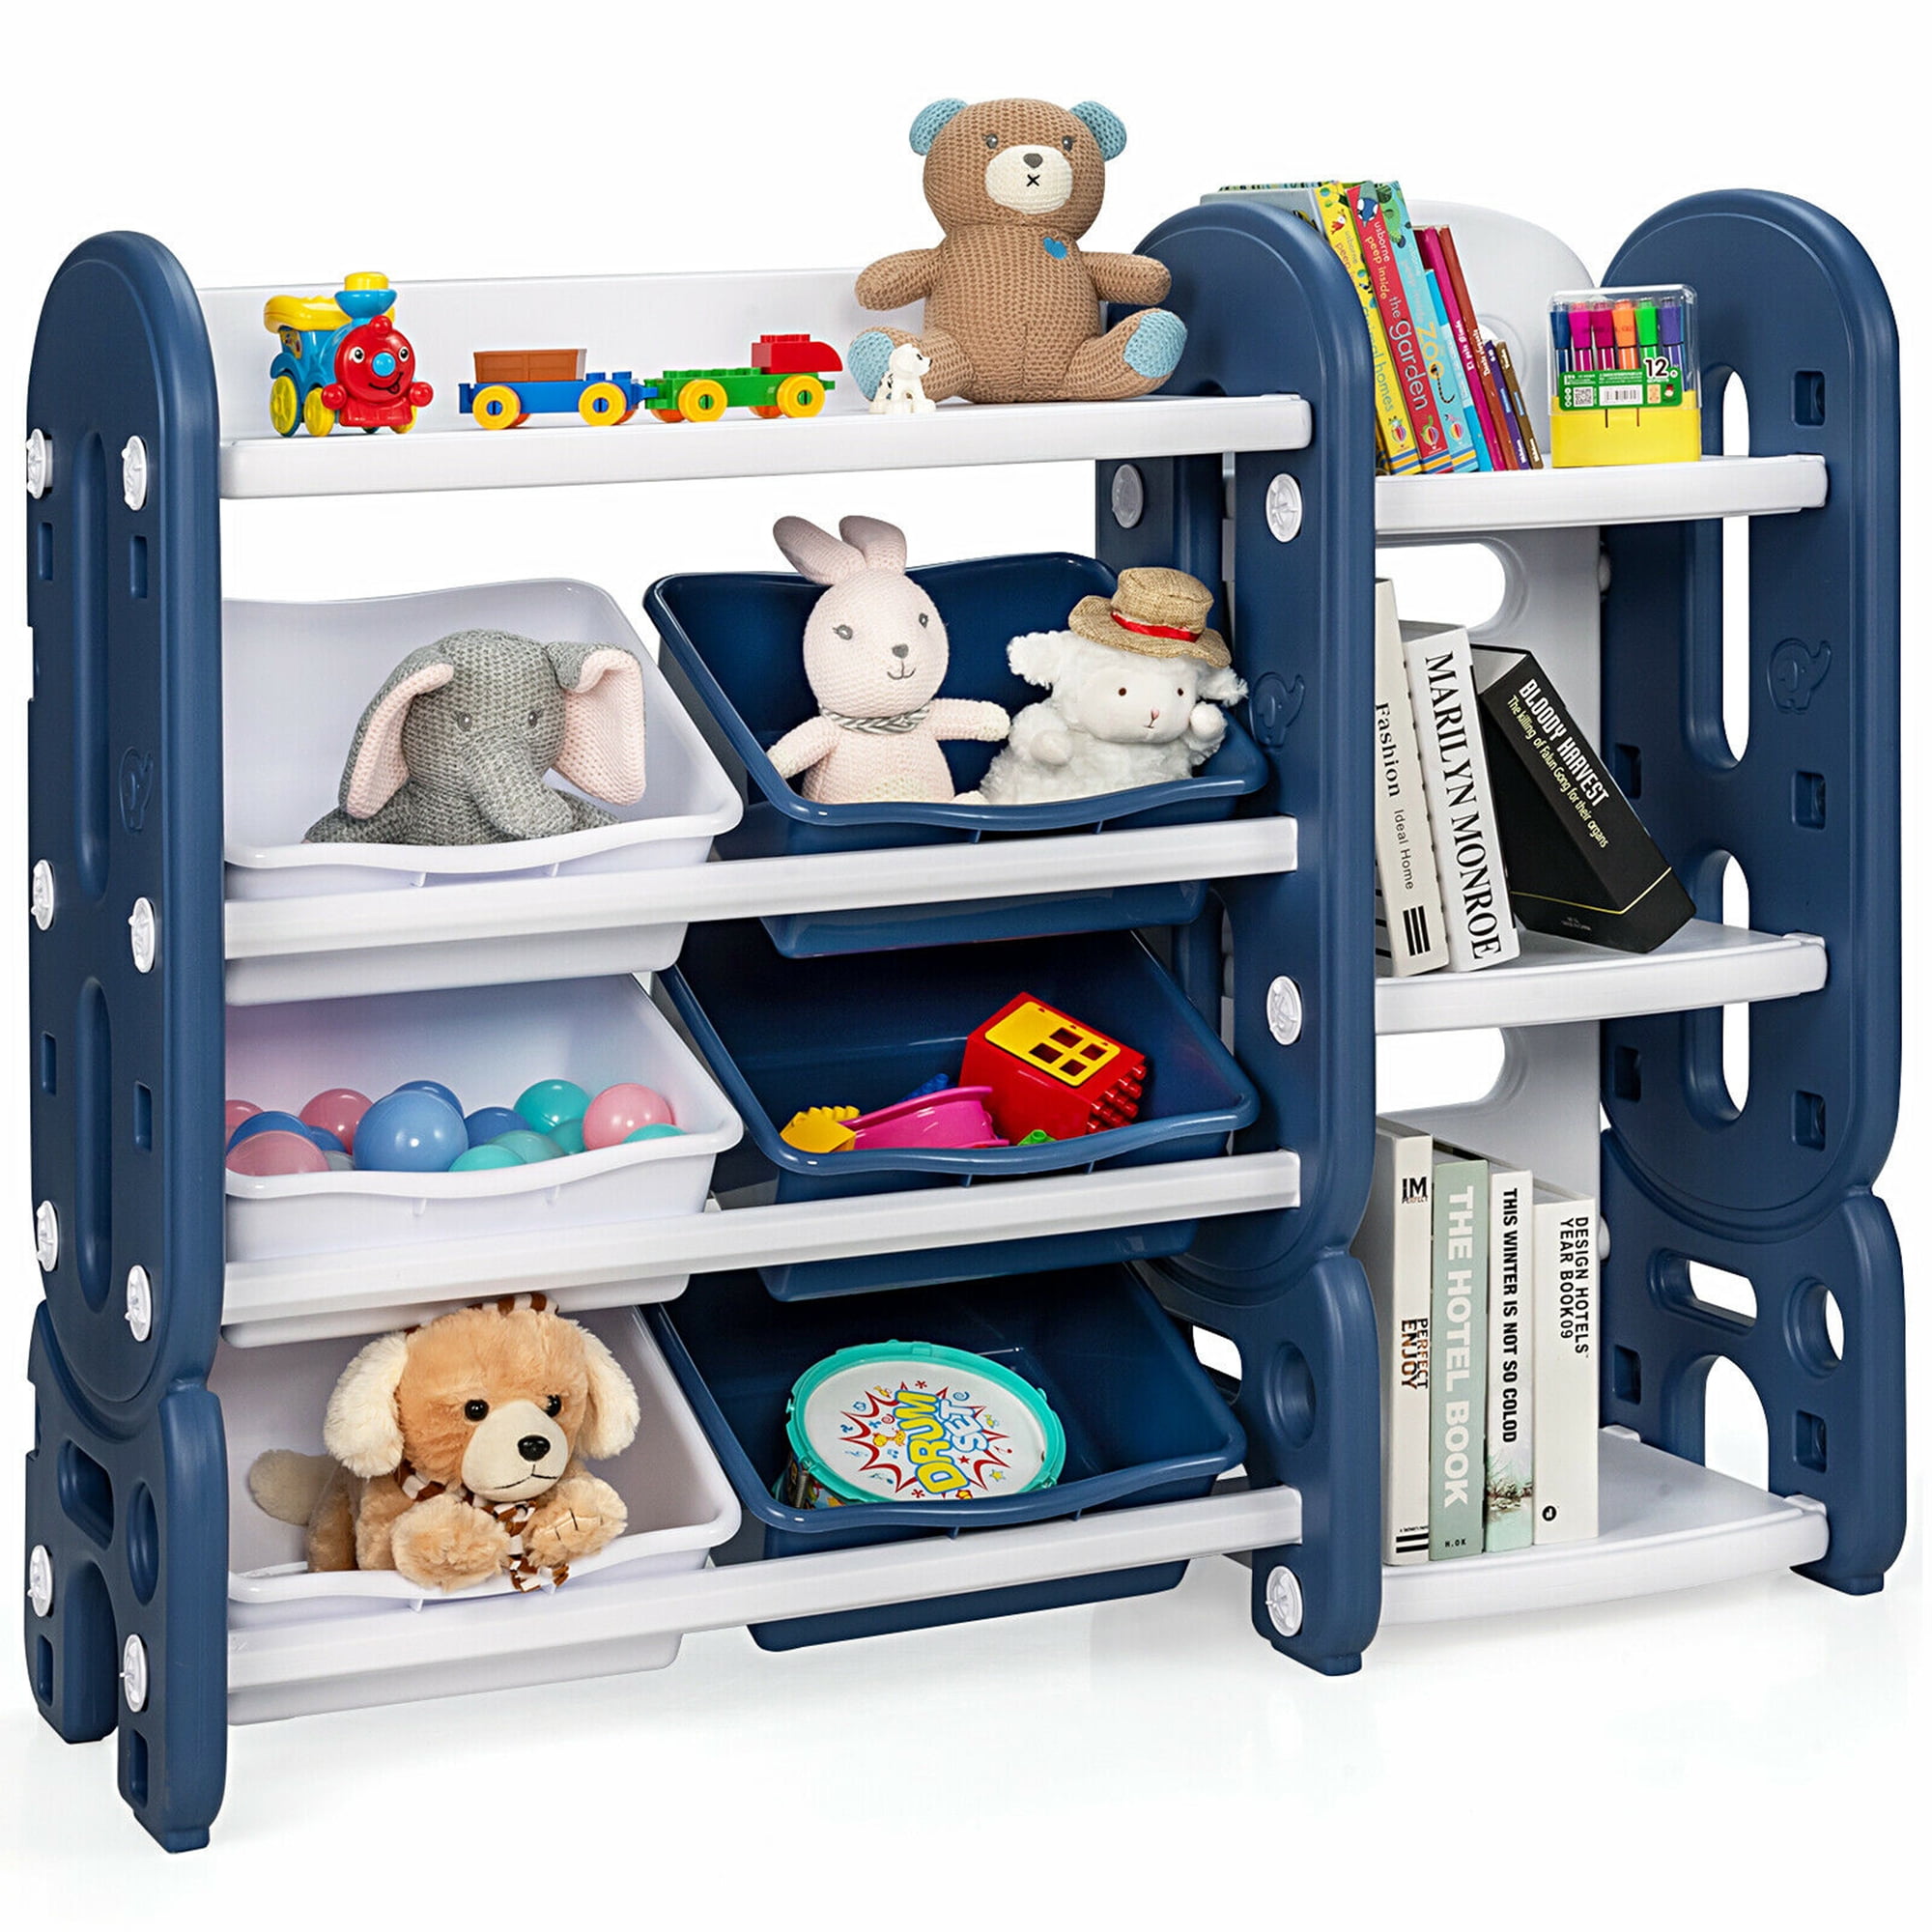 Toy Chest with Movable Drawers and Open Storage Cube Shelf Toy Bins with Wheels for Playroom Grey MUPATER Kids Toy Box Organizer Storage Cabinet Nursery Reading Nook and Bedroom